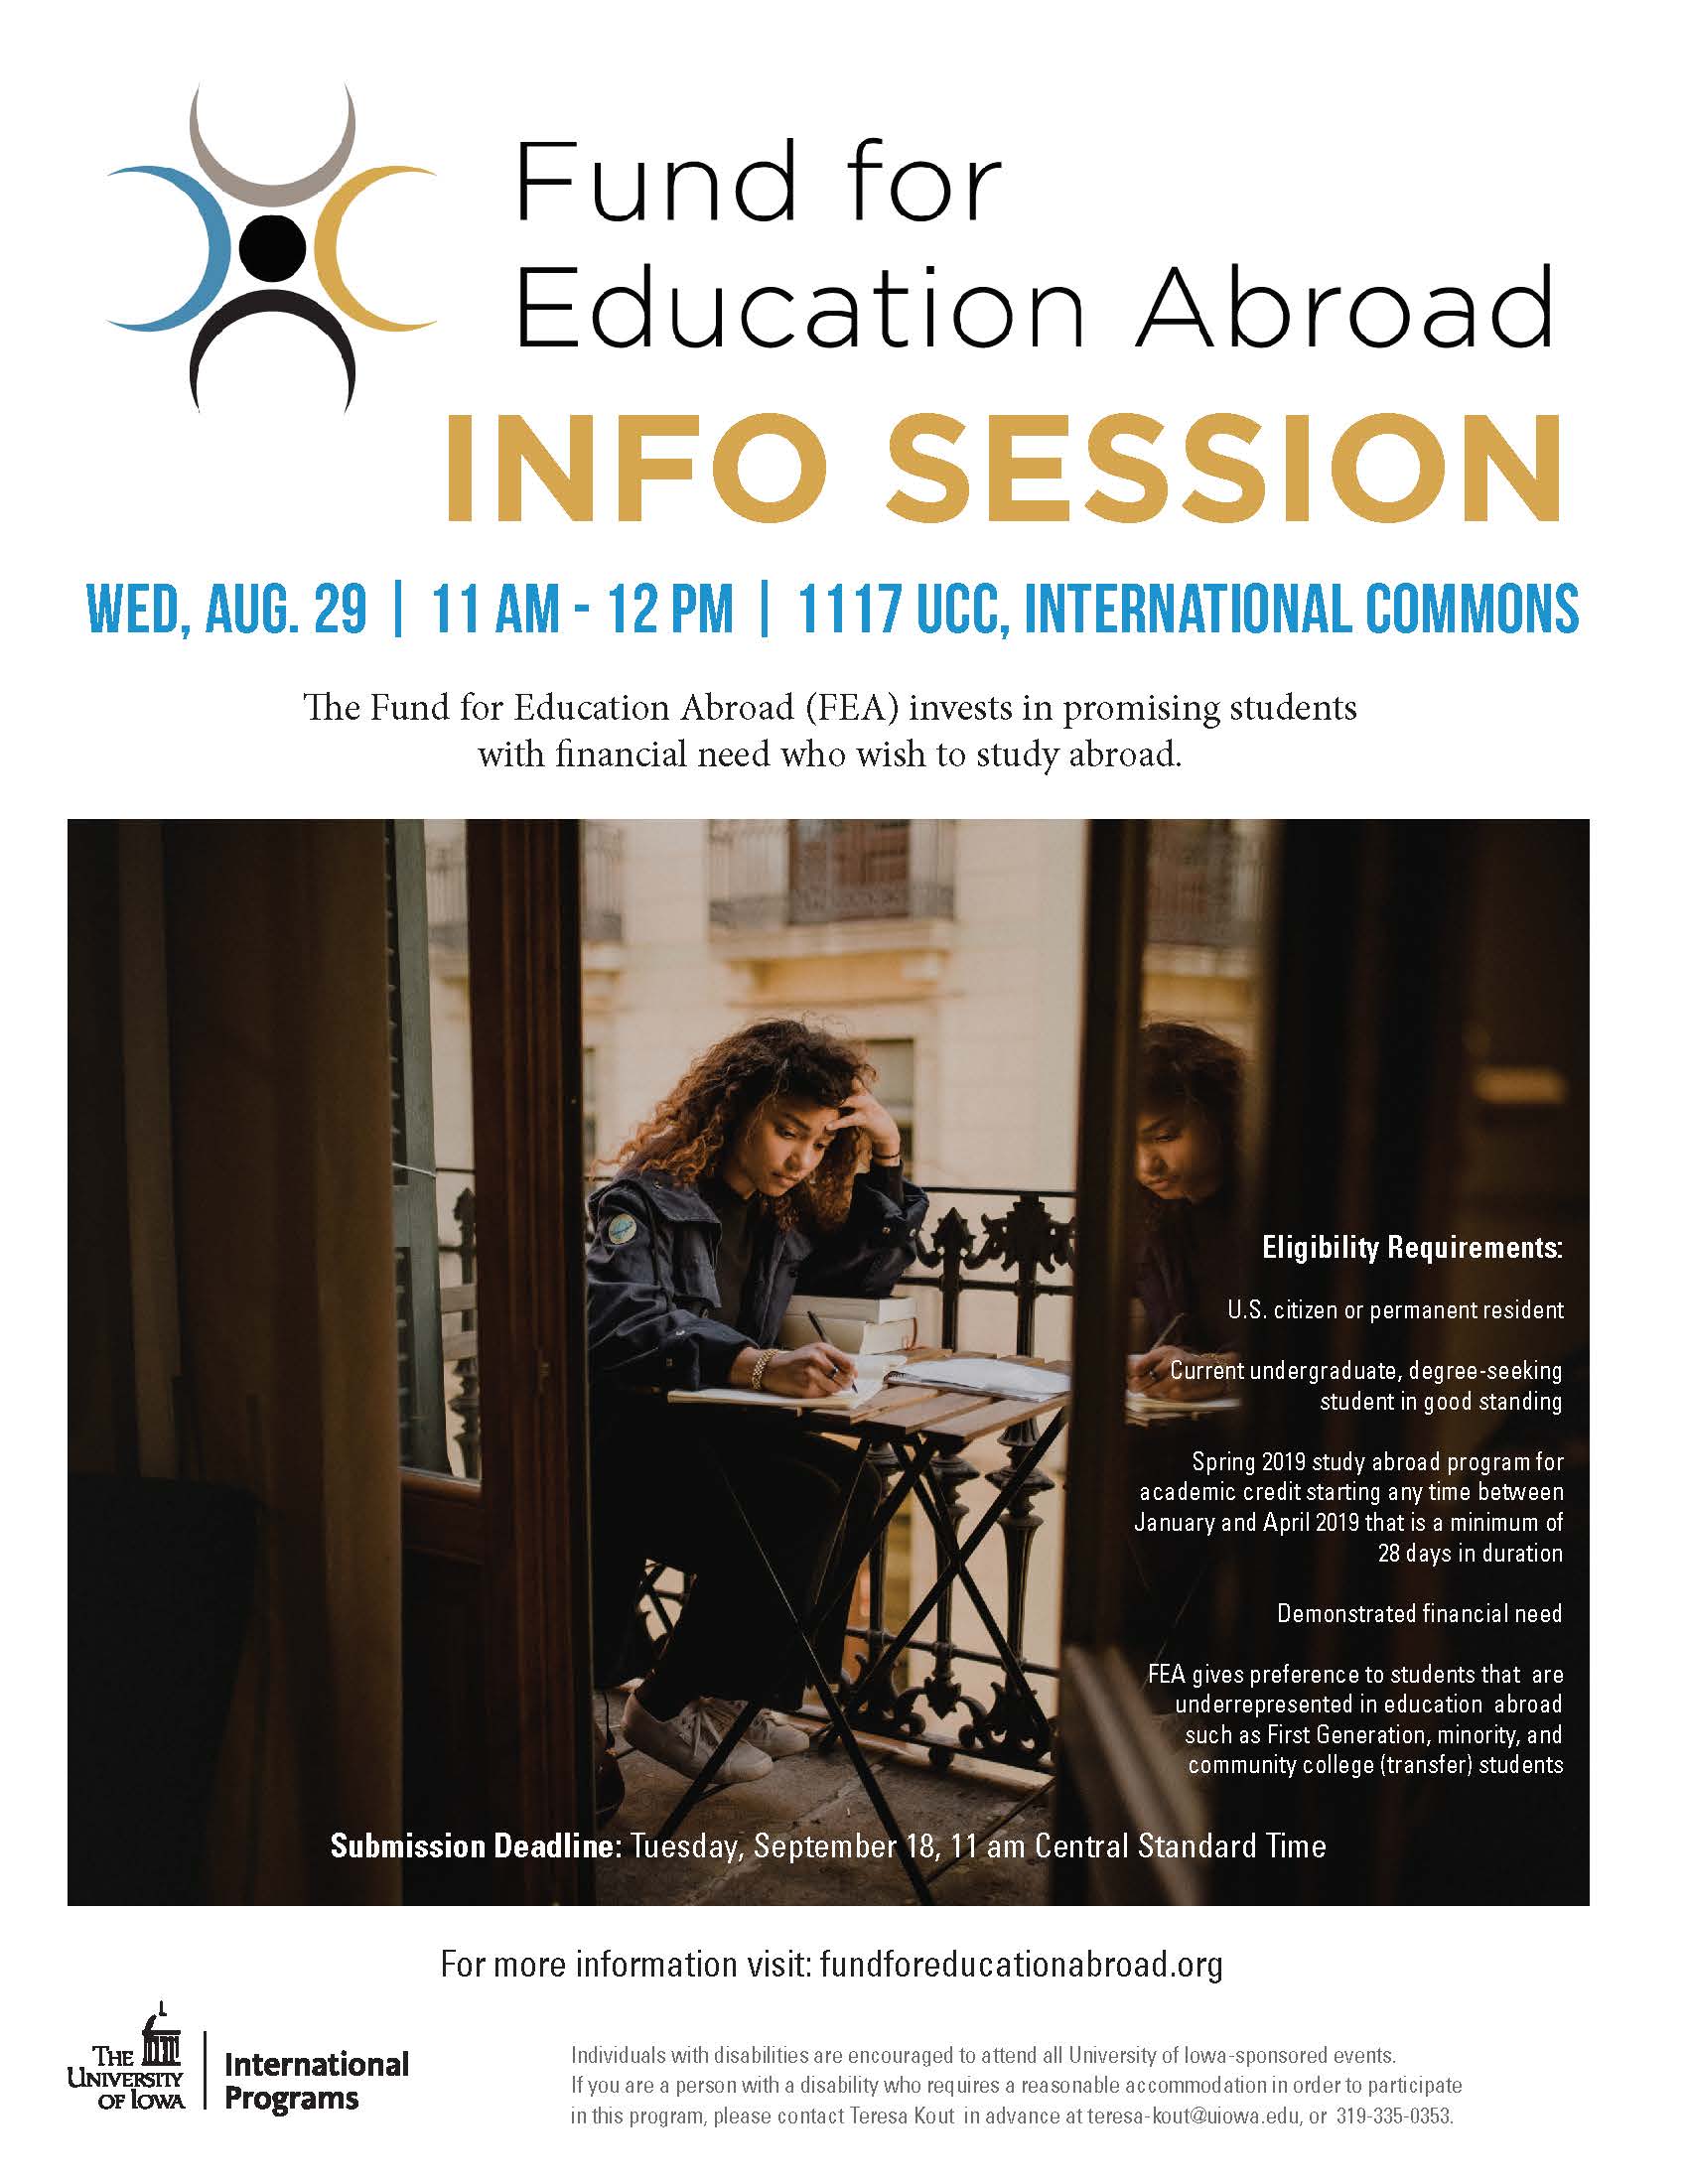 Fund for Education Abroad Info Session Poster